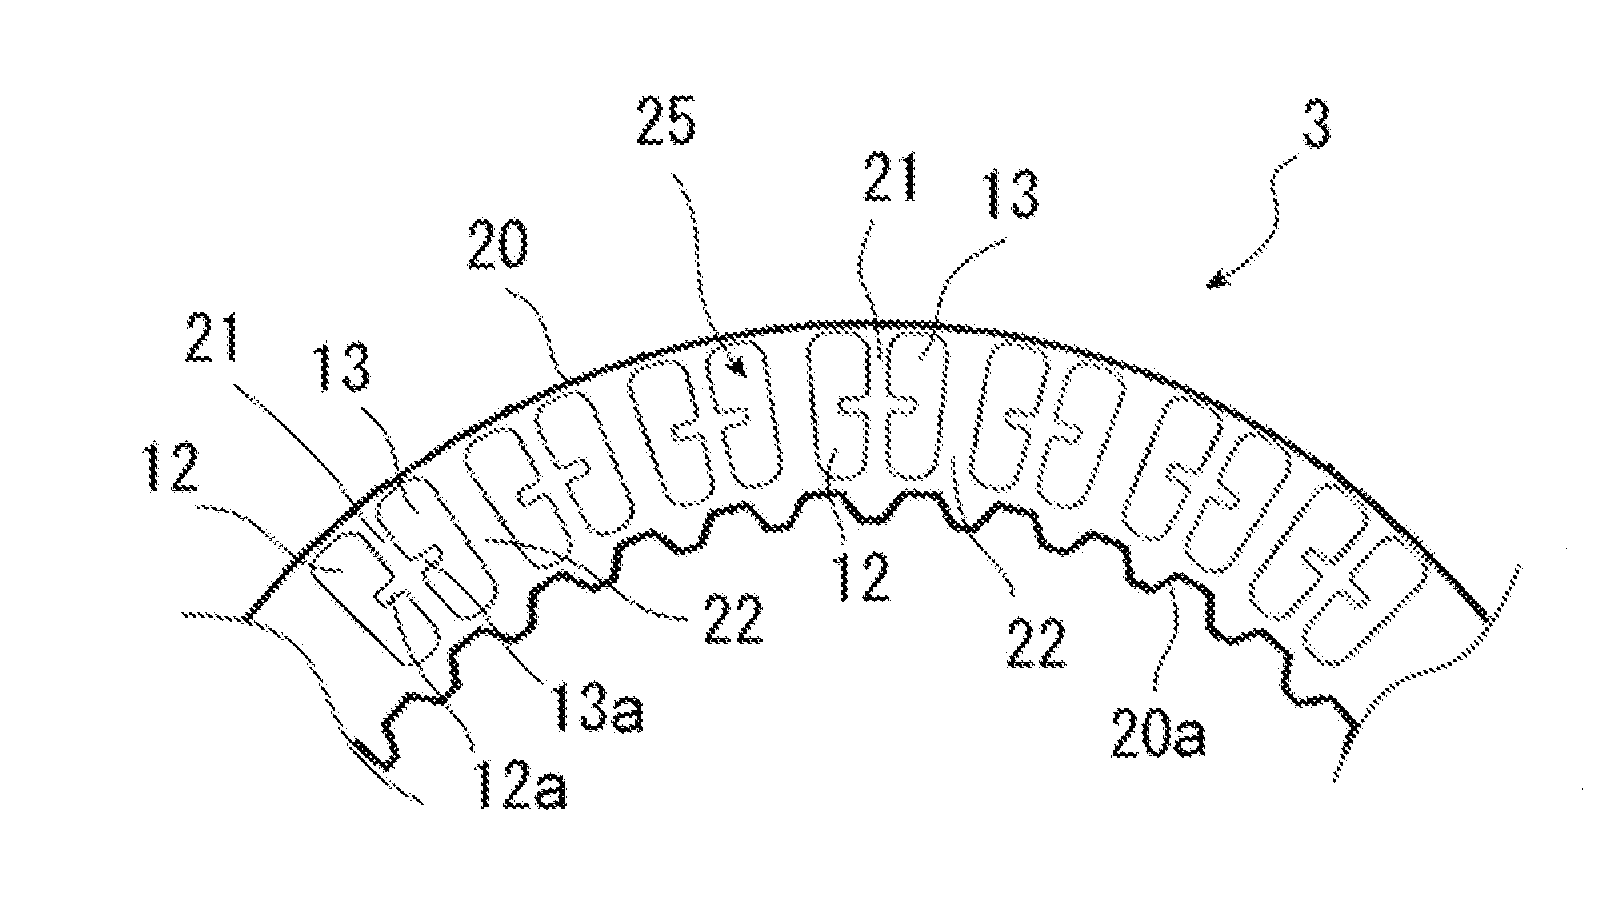 Friction plate and wet multiple-plate clutch with friction plate